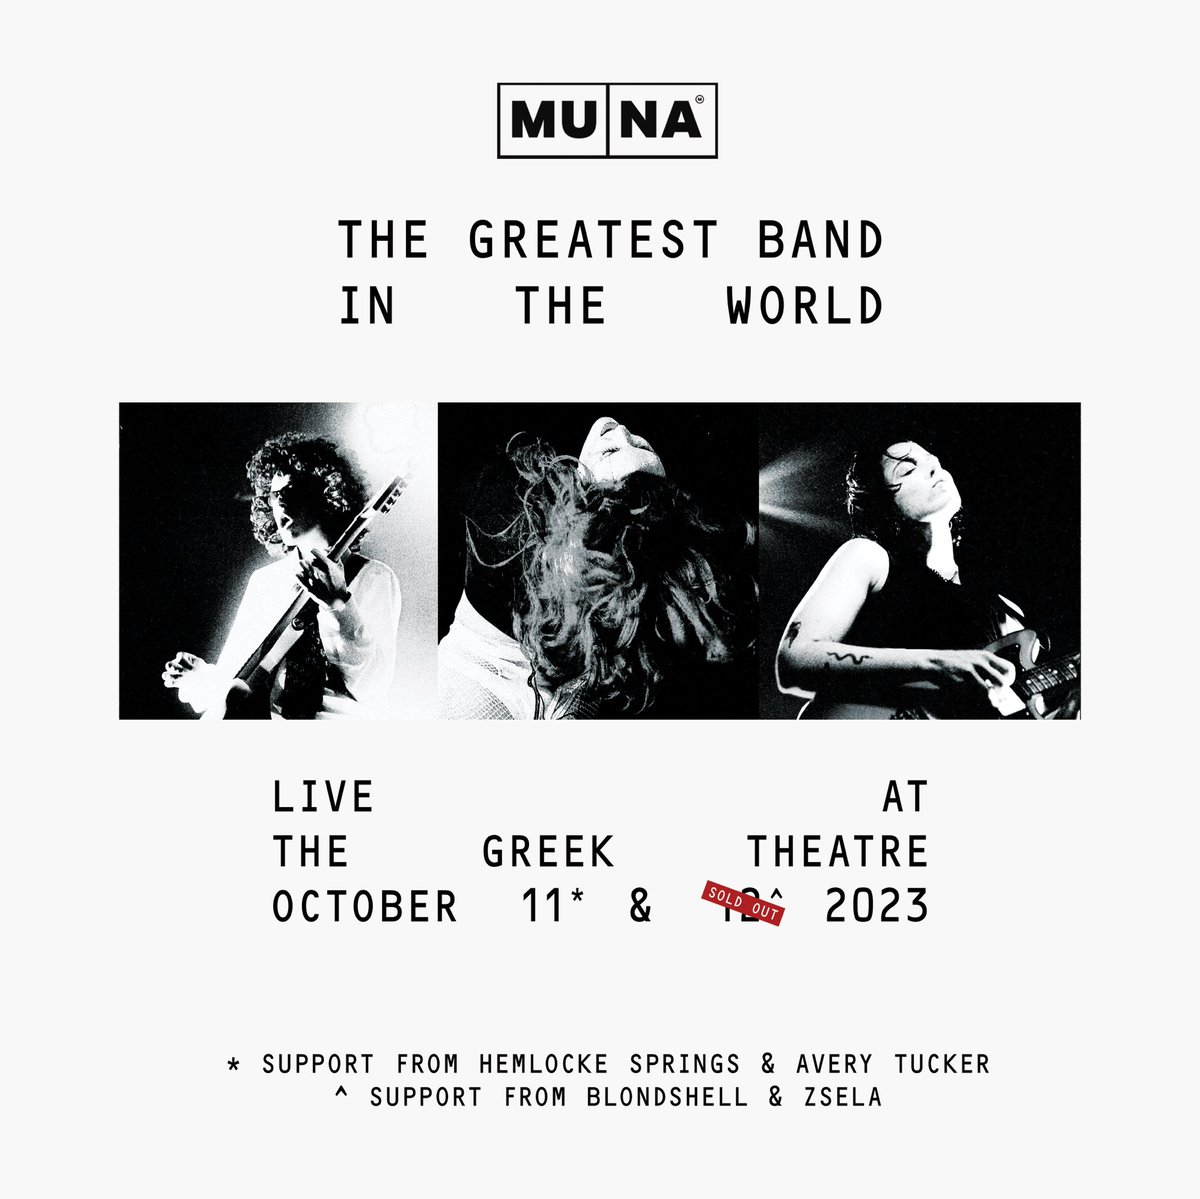 we're very excited about the support acts we’ve got for our shows at the greek. link in biography (tickets only avail for oct 11 show). see you next month, LA.